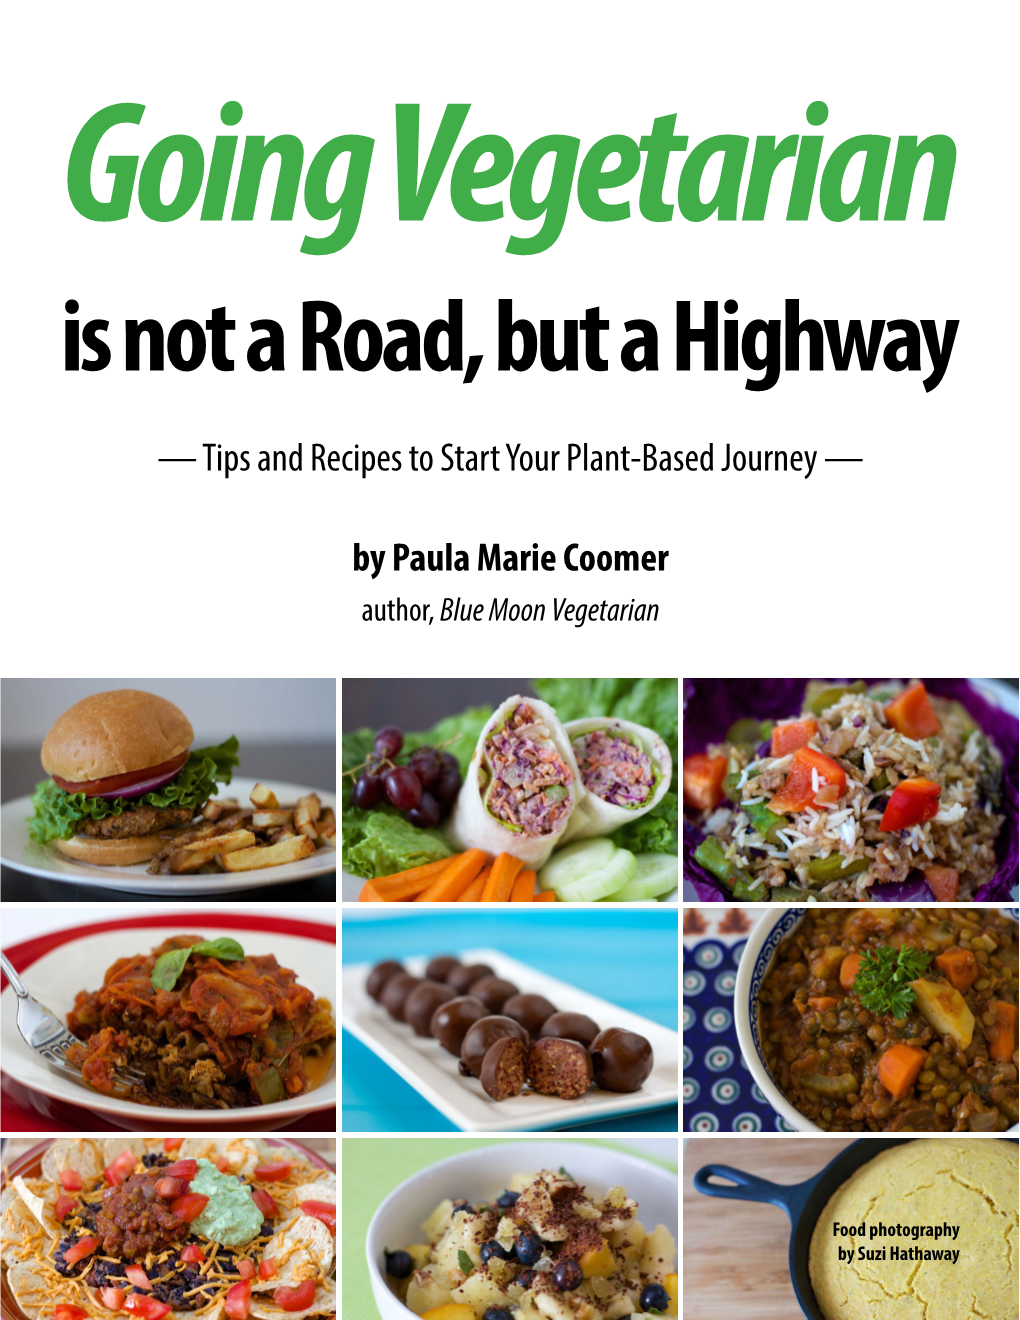 By Paula Marie Coomer Author, Blue Moon Vegetarian